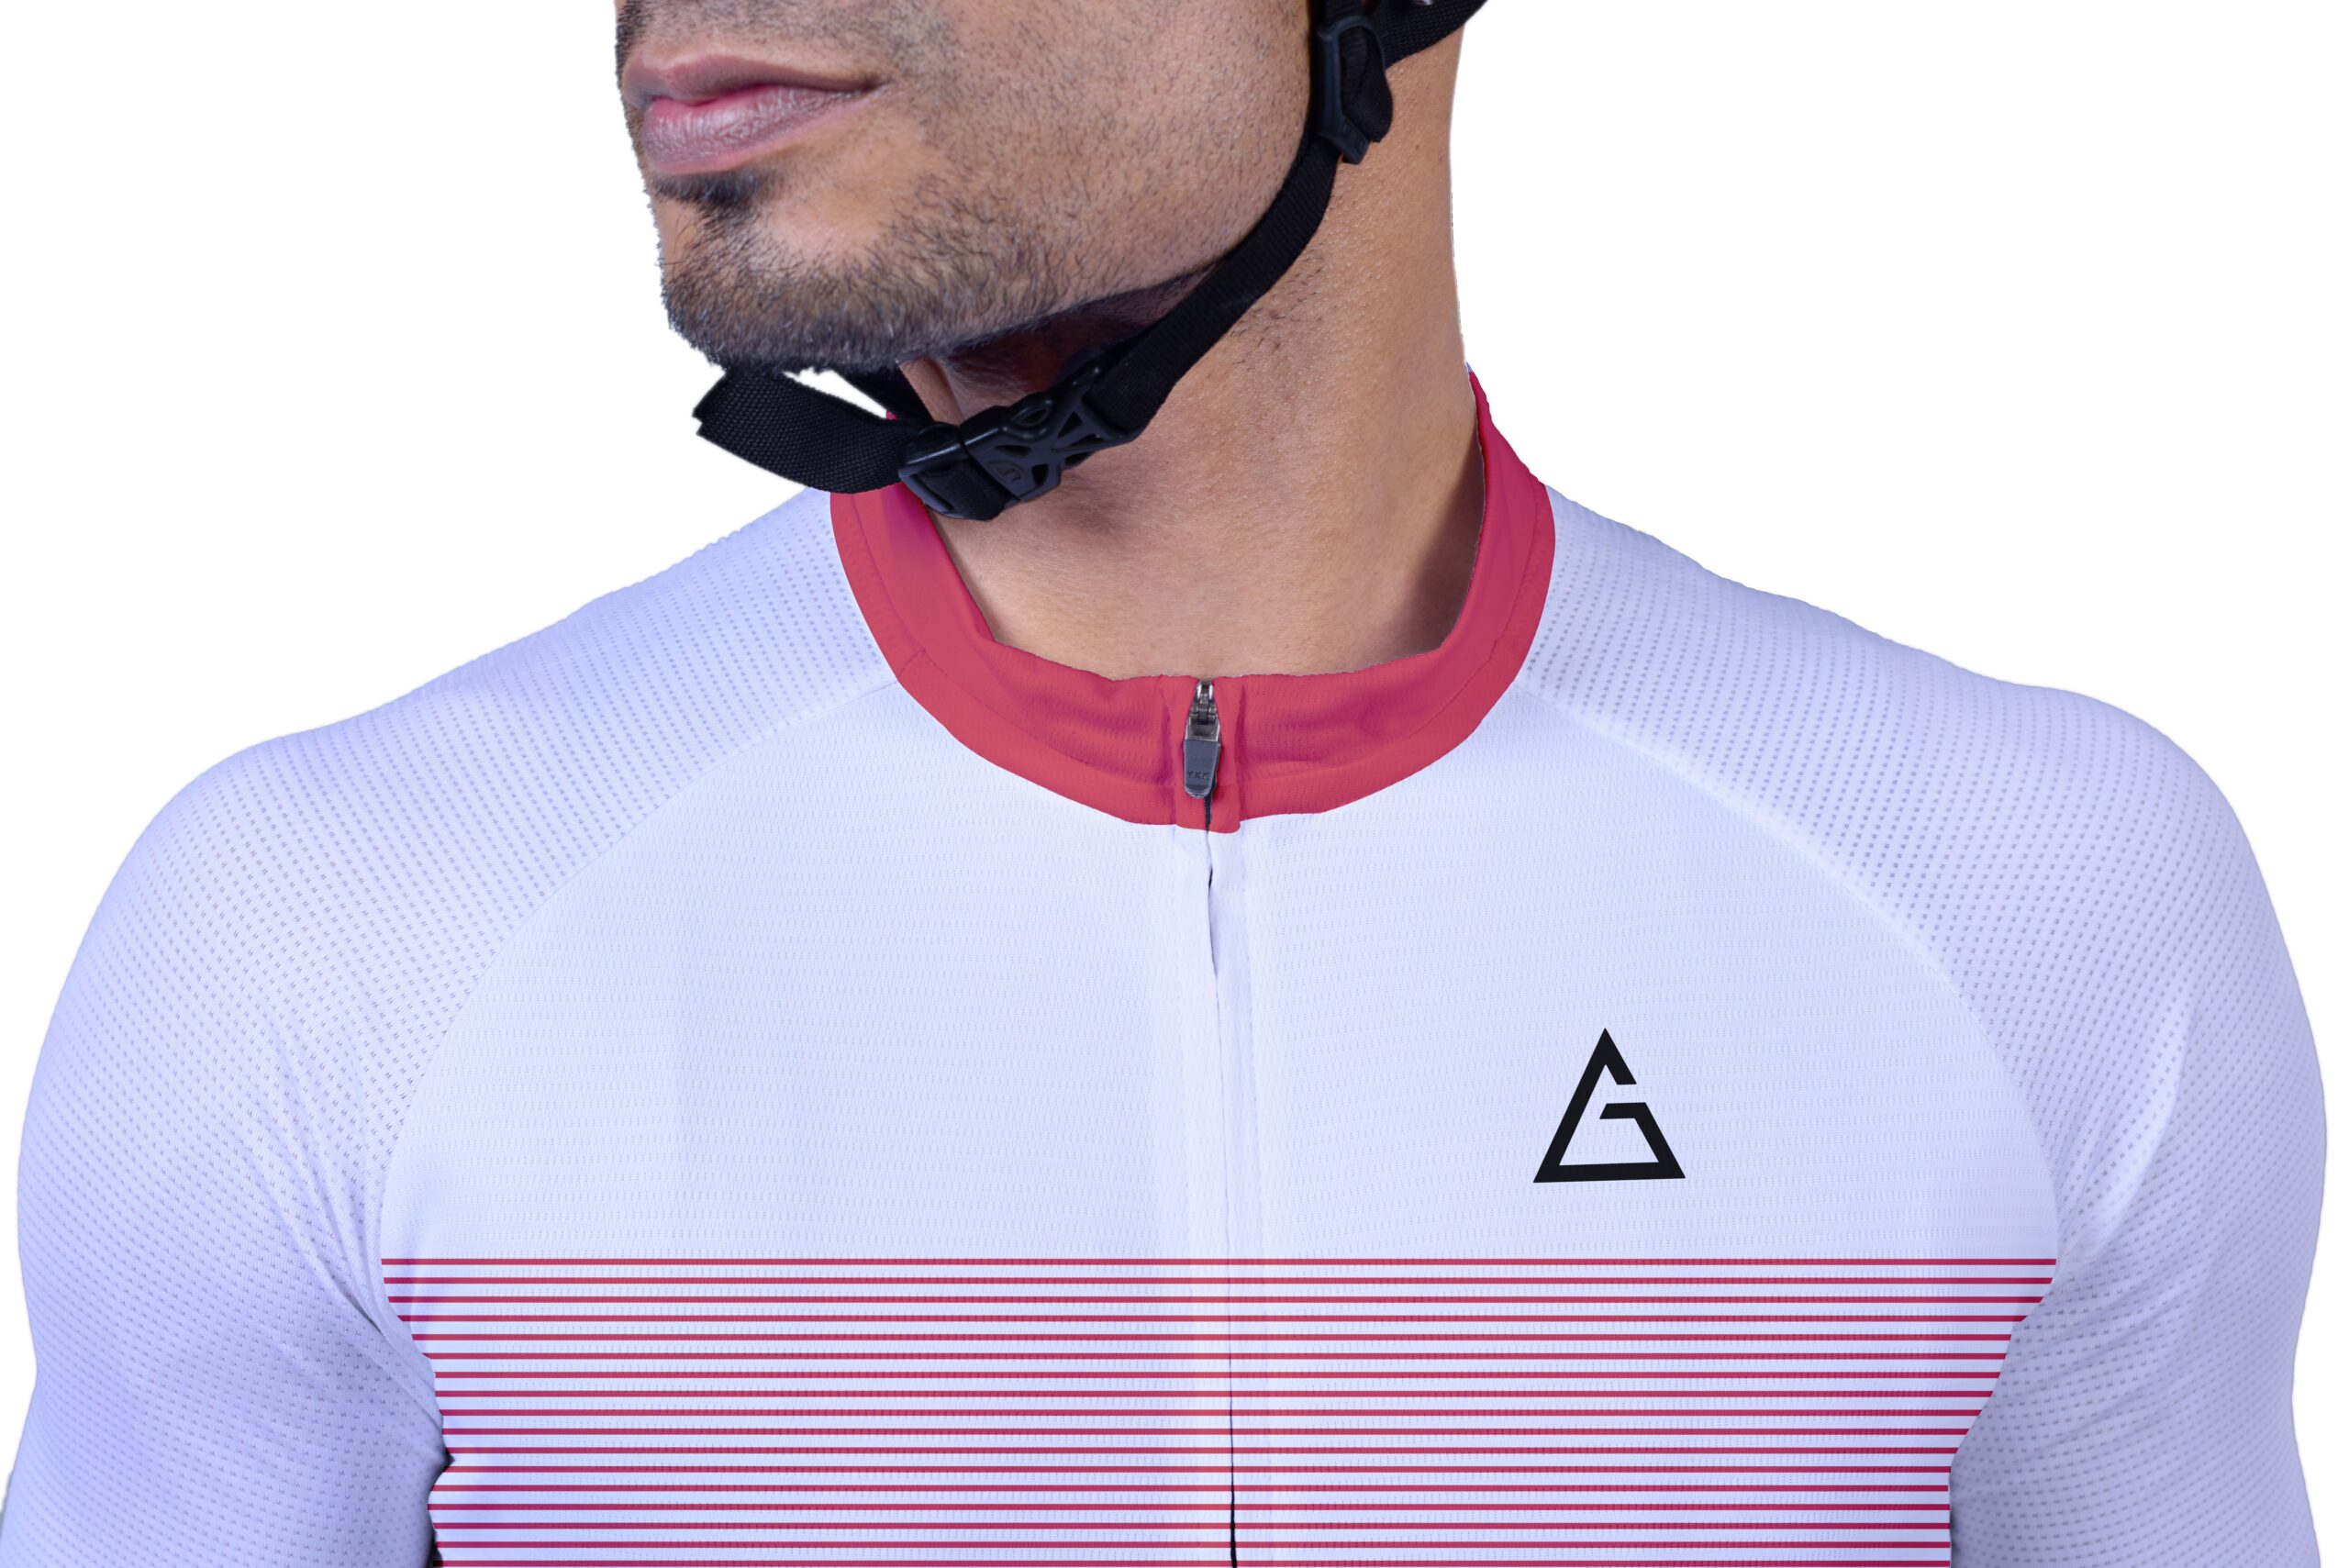 Cycling Jersey Ruby Elegance – Race Fit With Power Band